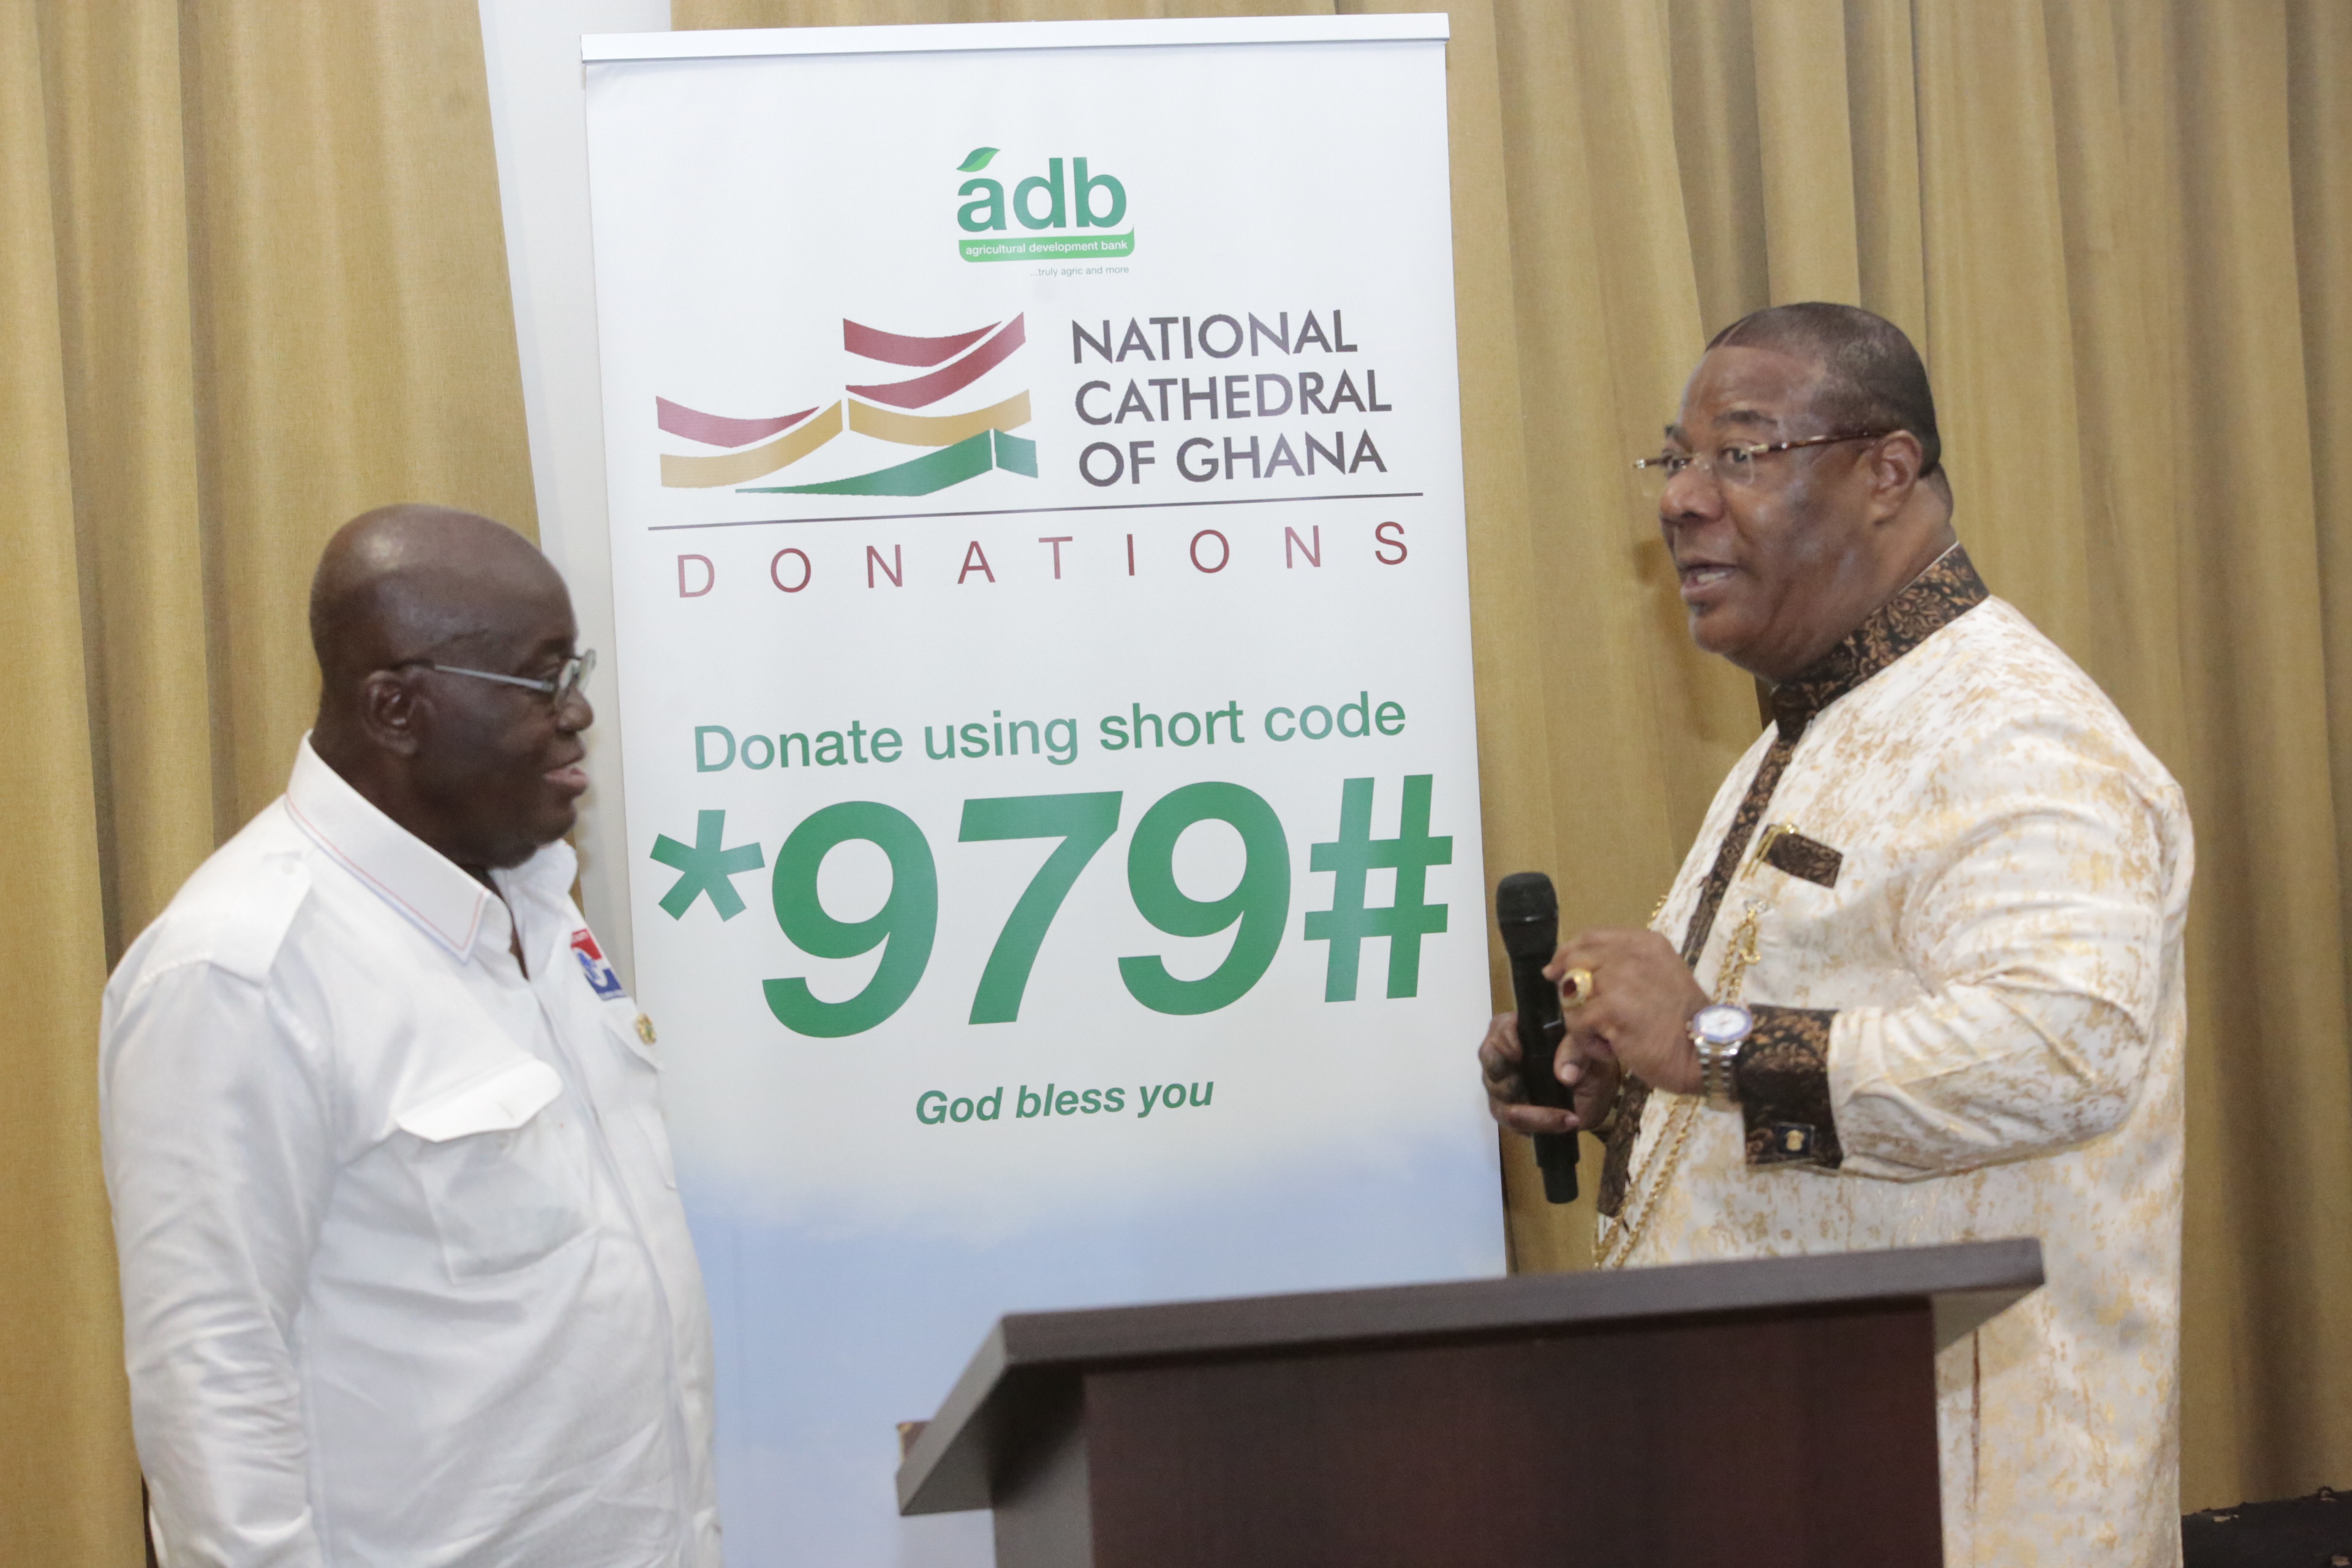 President  Akufo-Addo launching the Cathedral Donation Code, while Archbishop Nicholas Duncan-Williams, member of the Board of  Trustees of the National Cathedral, looks on. Picture: Samuel Tei Adano